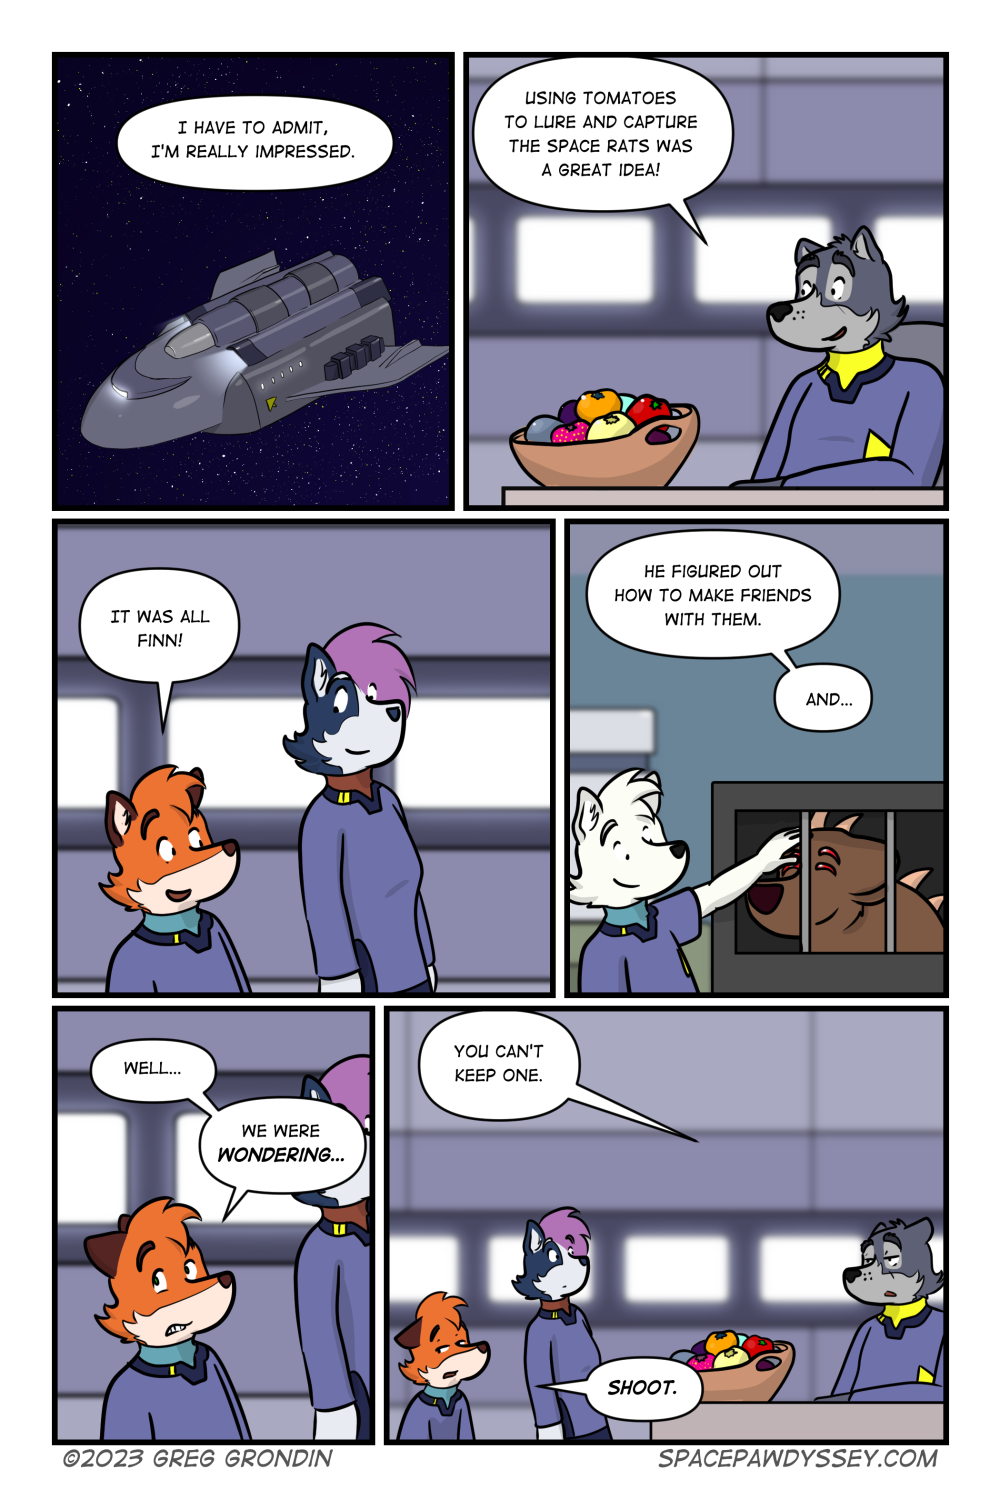 Space Pawdyssey #623